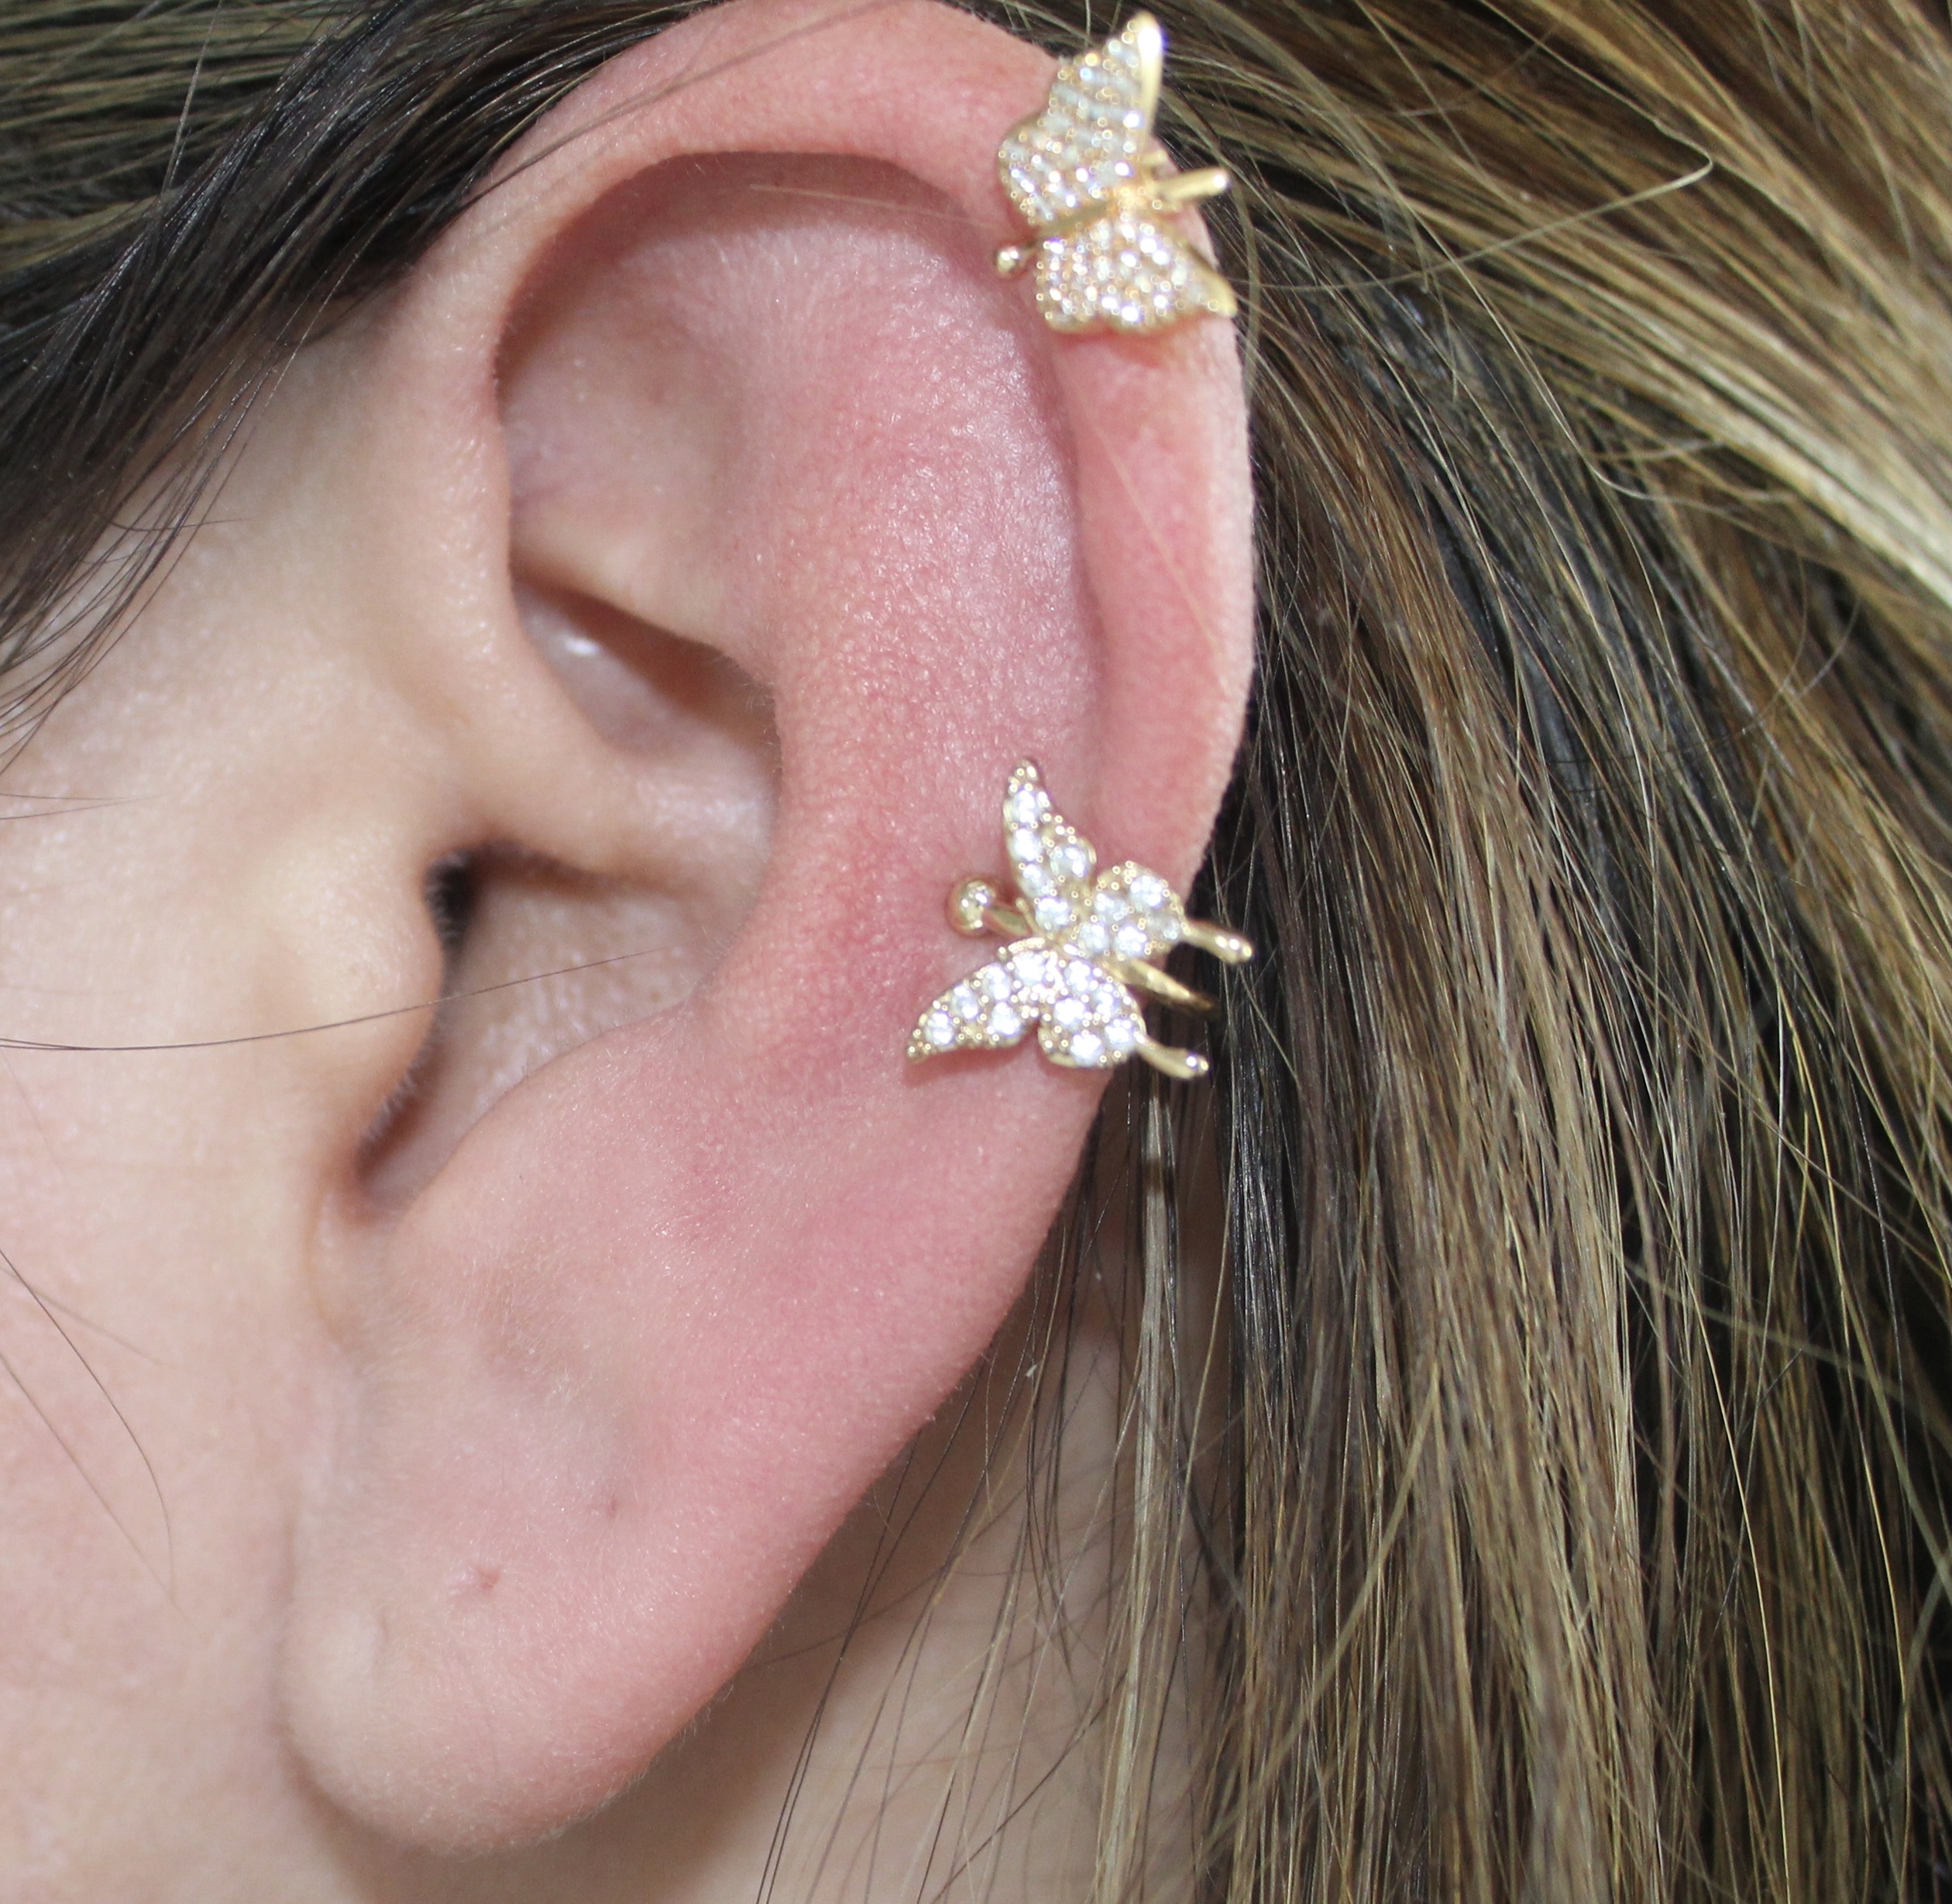 This Monarch Ear Cuffs is made with love by Geneva Treasures! Shop more unique gift ideas today with Spots Initiatives, the best way to support creators.